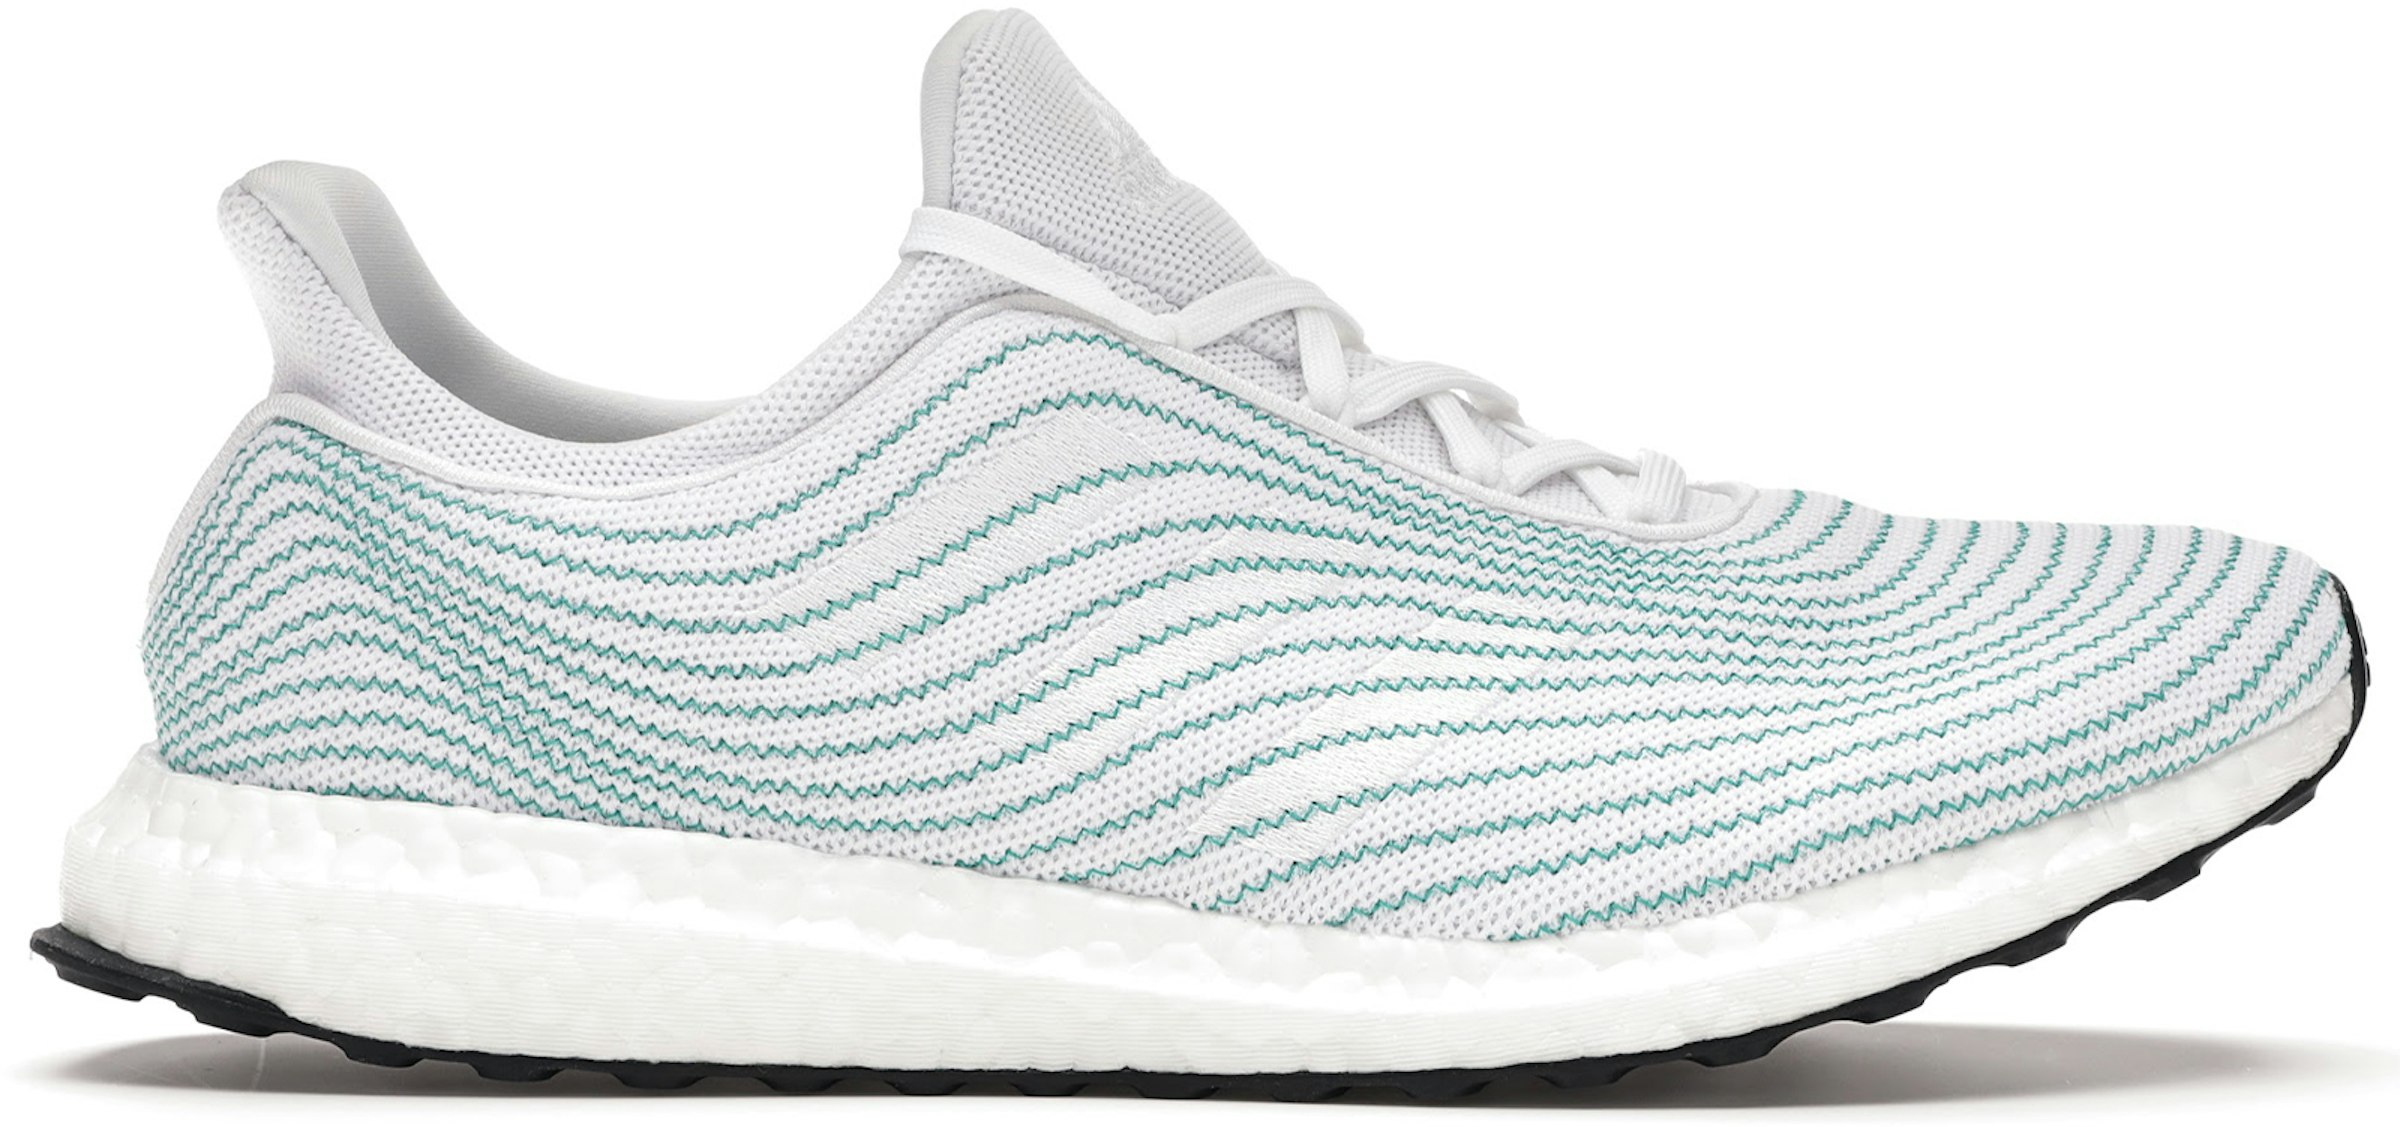 adidas Ultra Boost DNA White Men's EH1173 - US